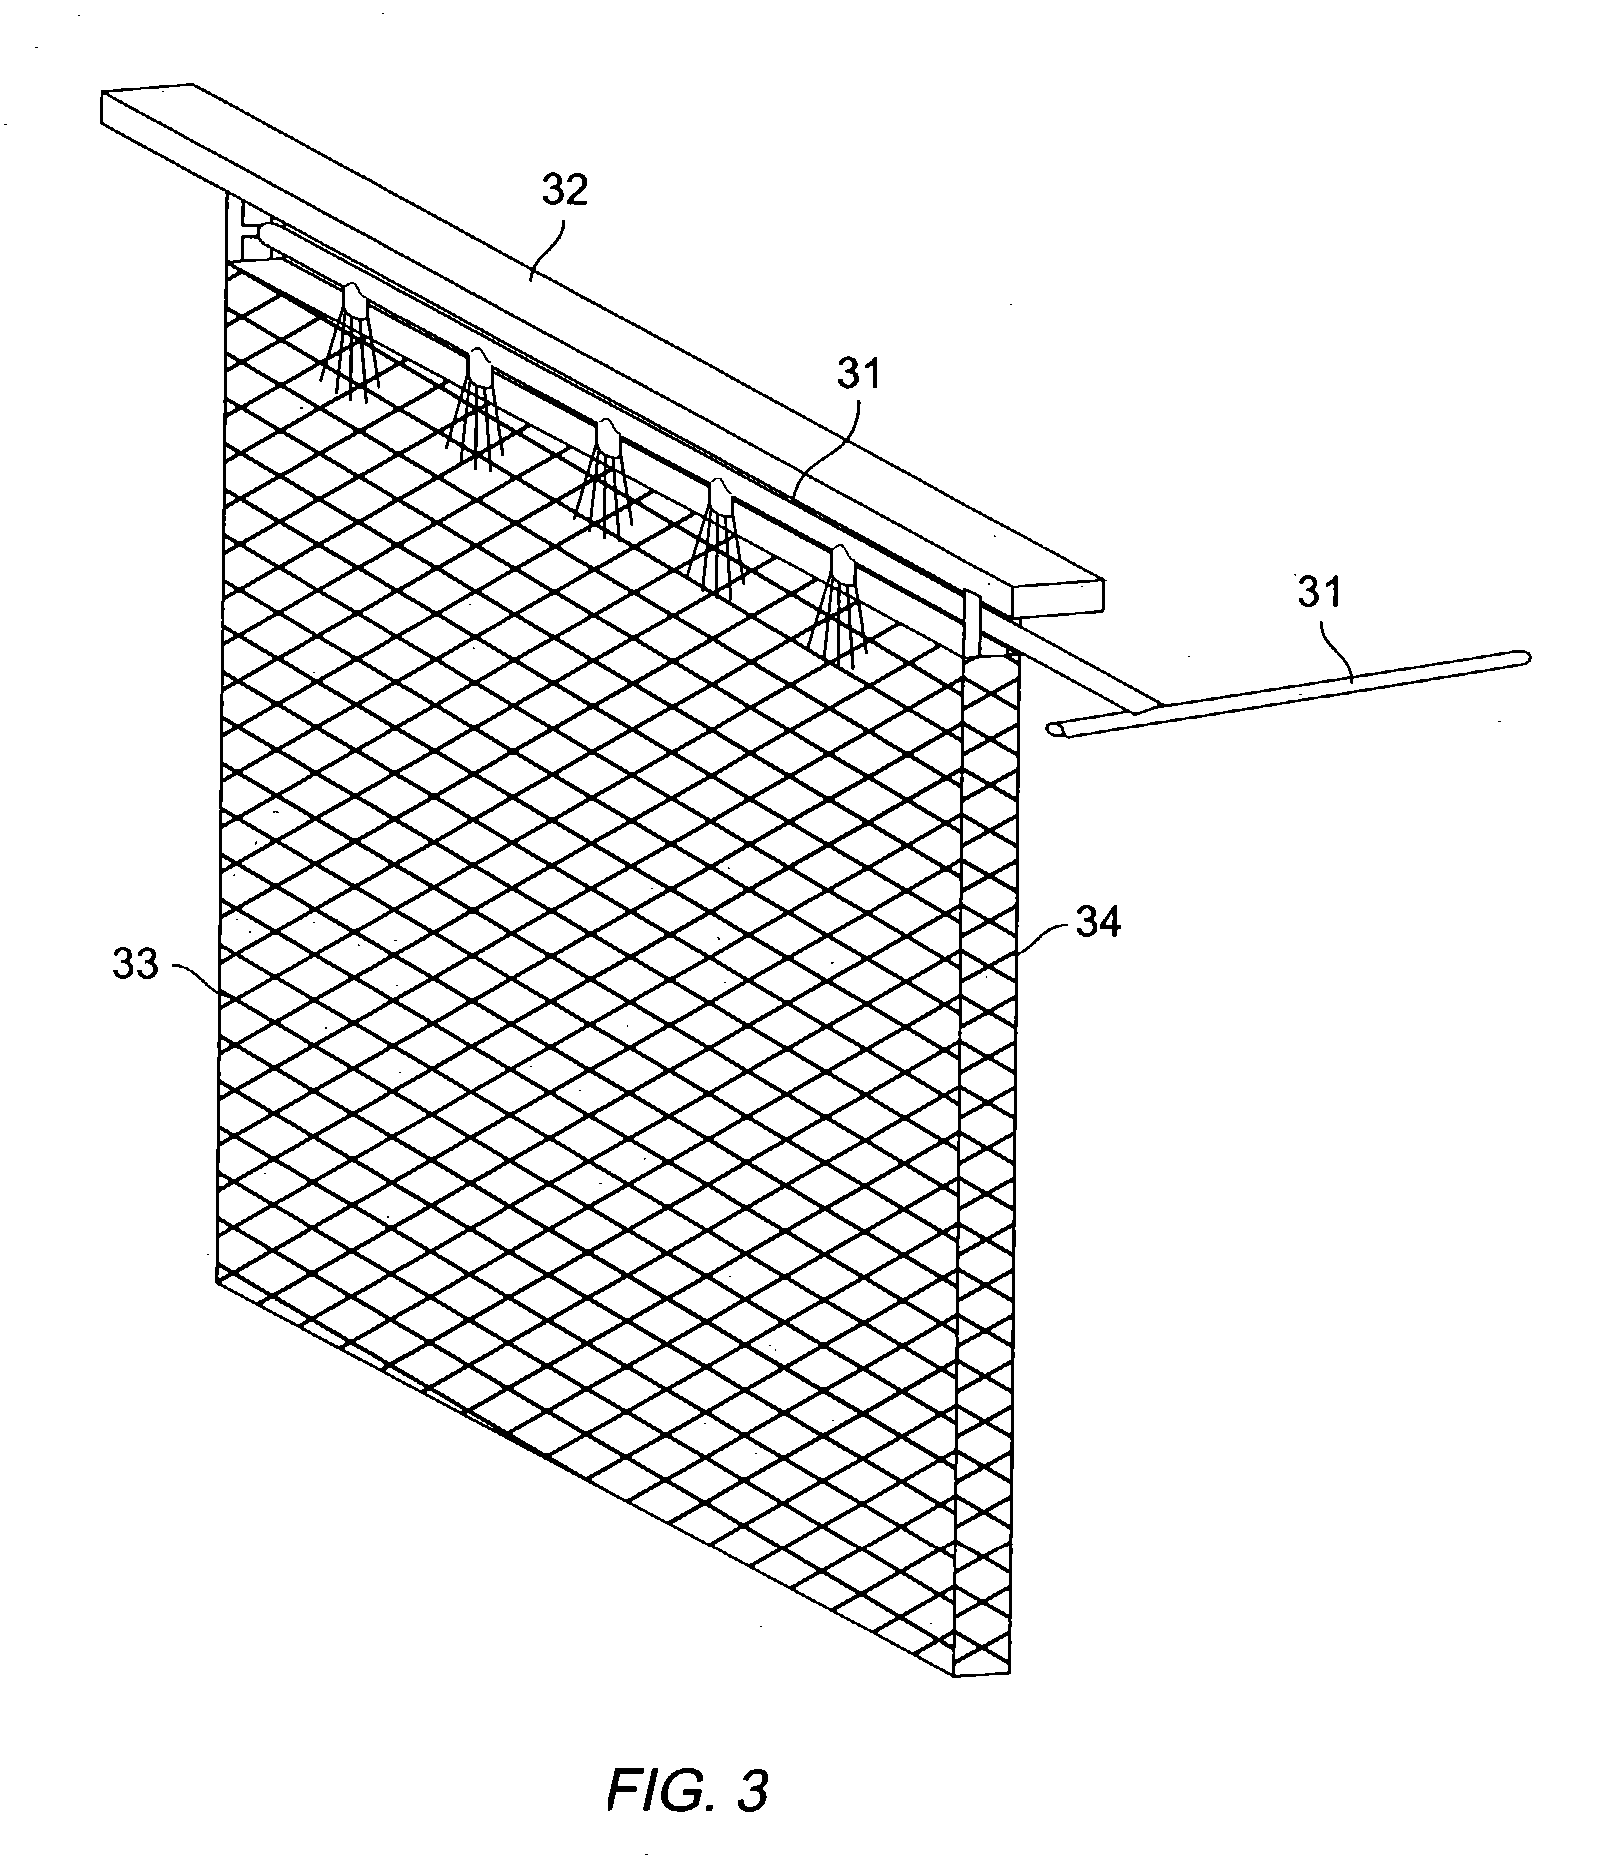 Method and apparatus for electrowinning copper using the ferrous/ferric anode reaction